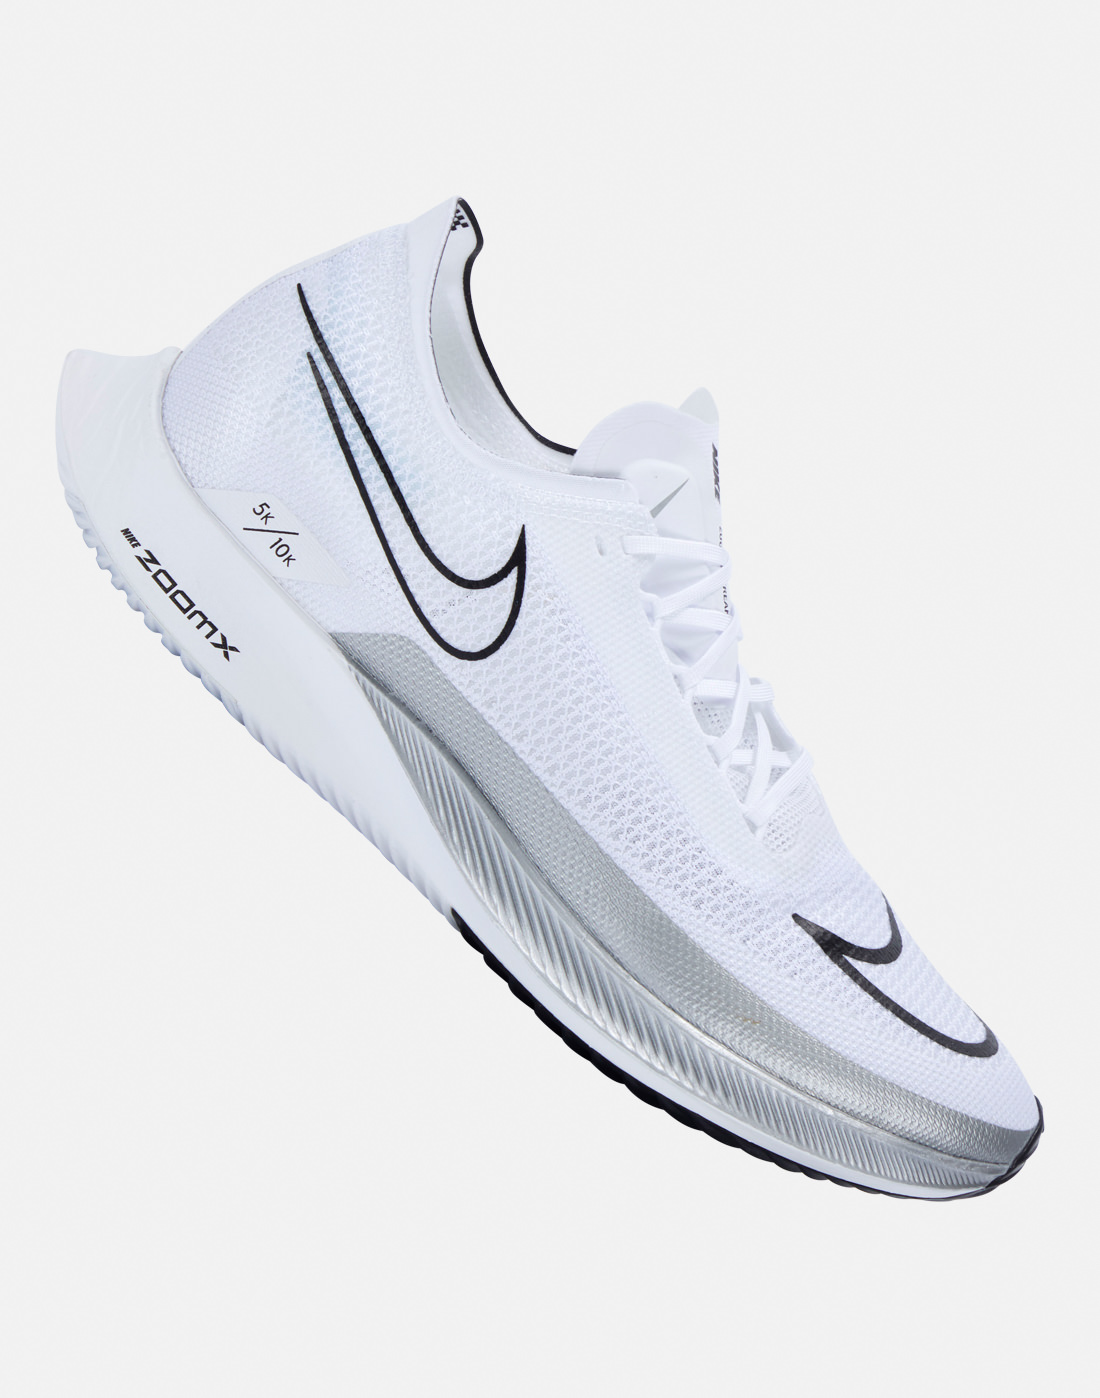 Nike Mens Air ZoomX Streakfly - White | Life Style Sports UK